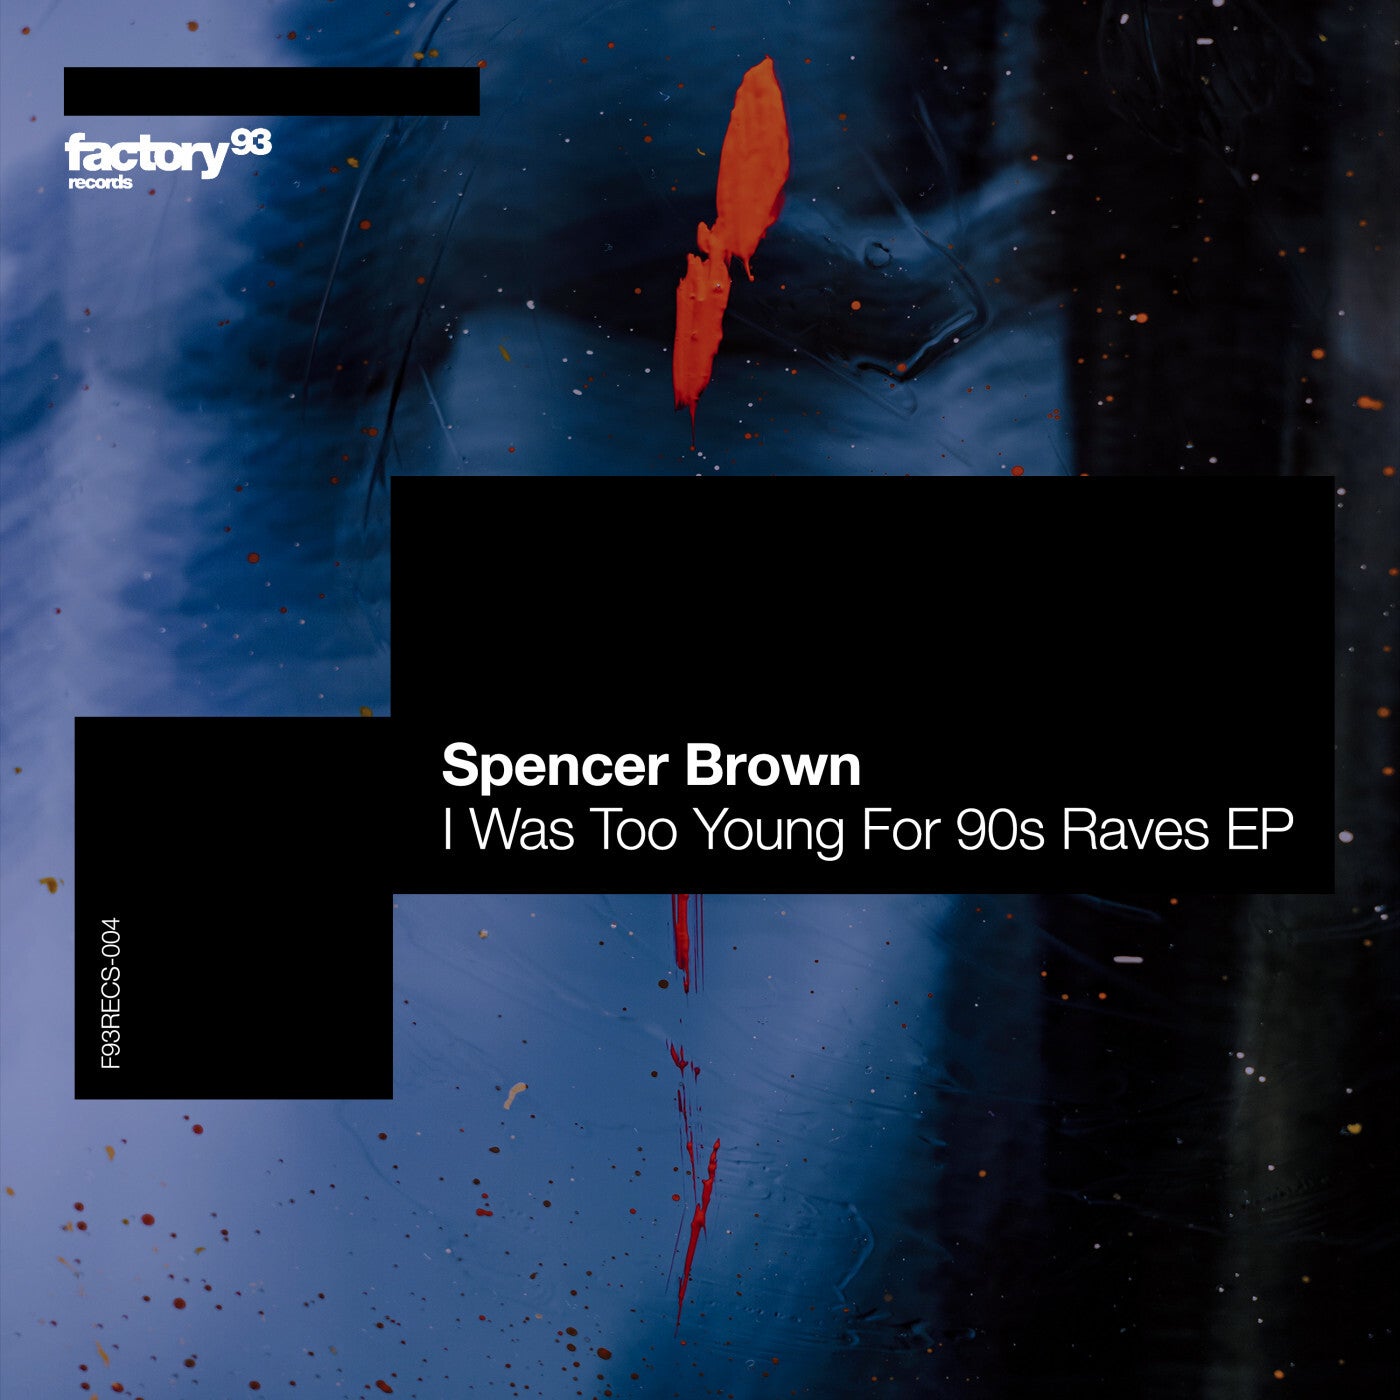 Spencer Brown - I Was Too Young for 90s Raves EP [F93RECS004]